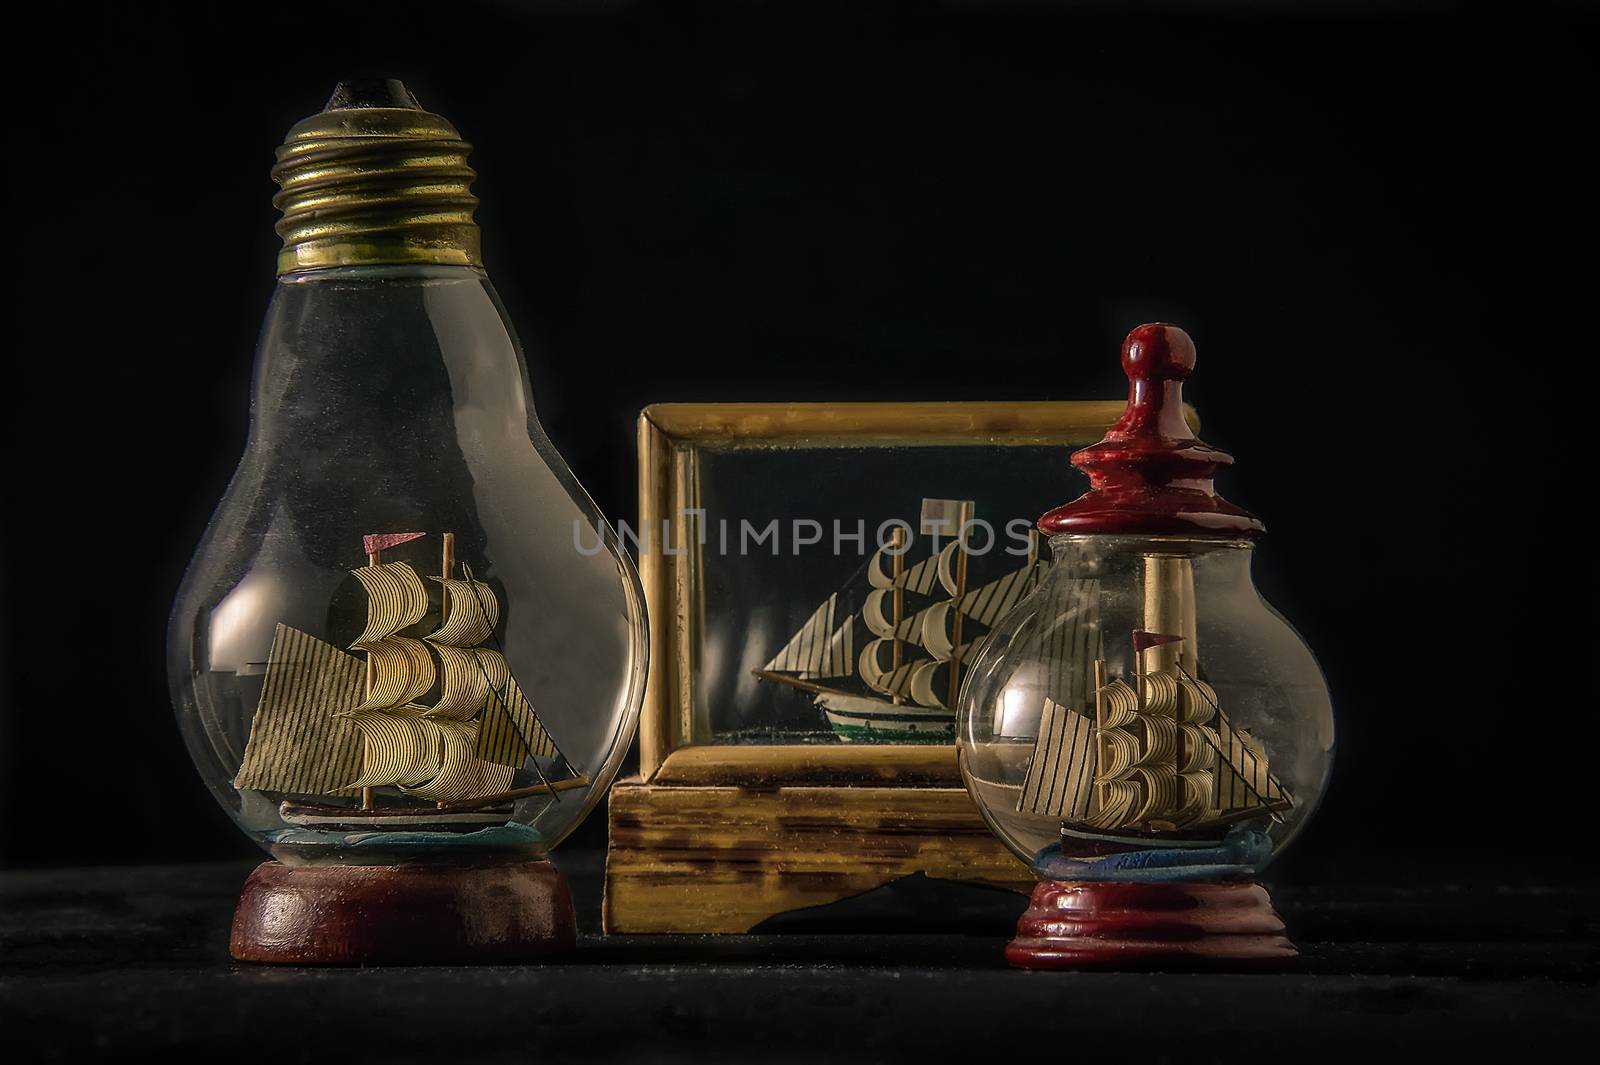 Ships in bottles inside glass cases of various shapes: a still life of vintage decoration items.